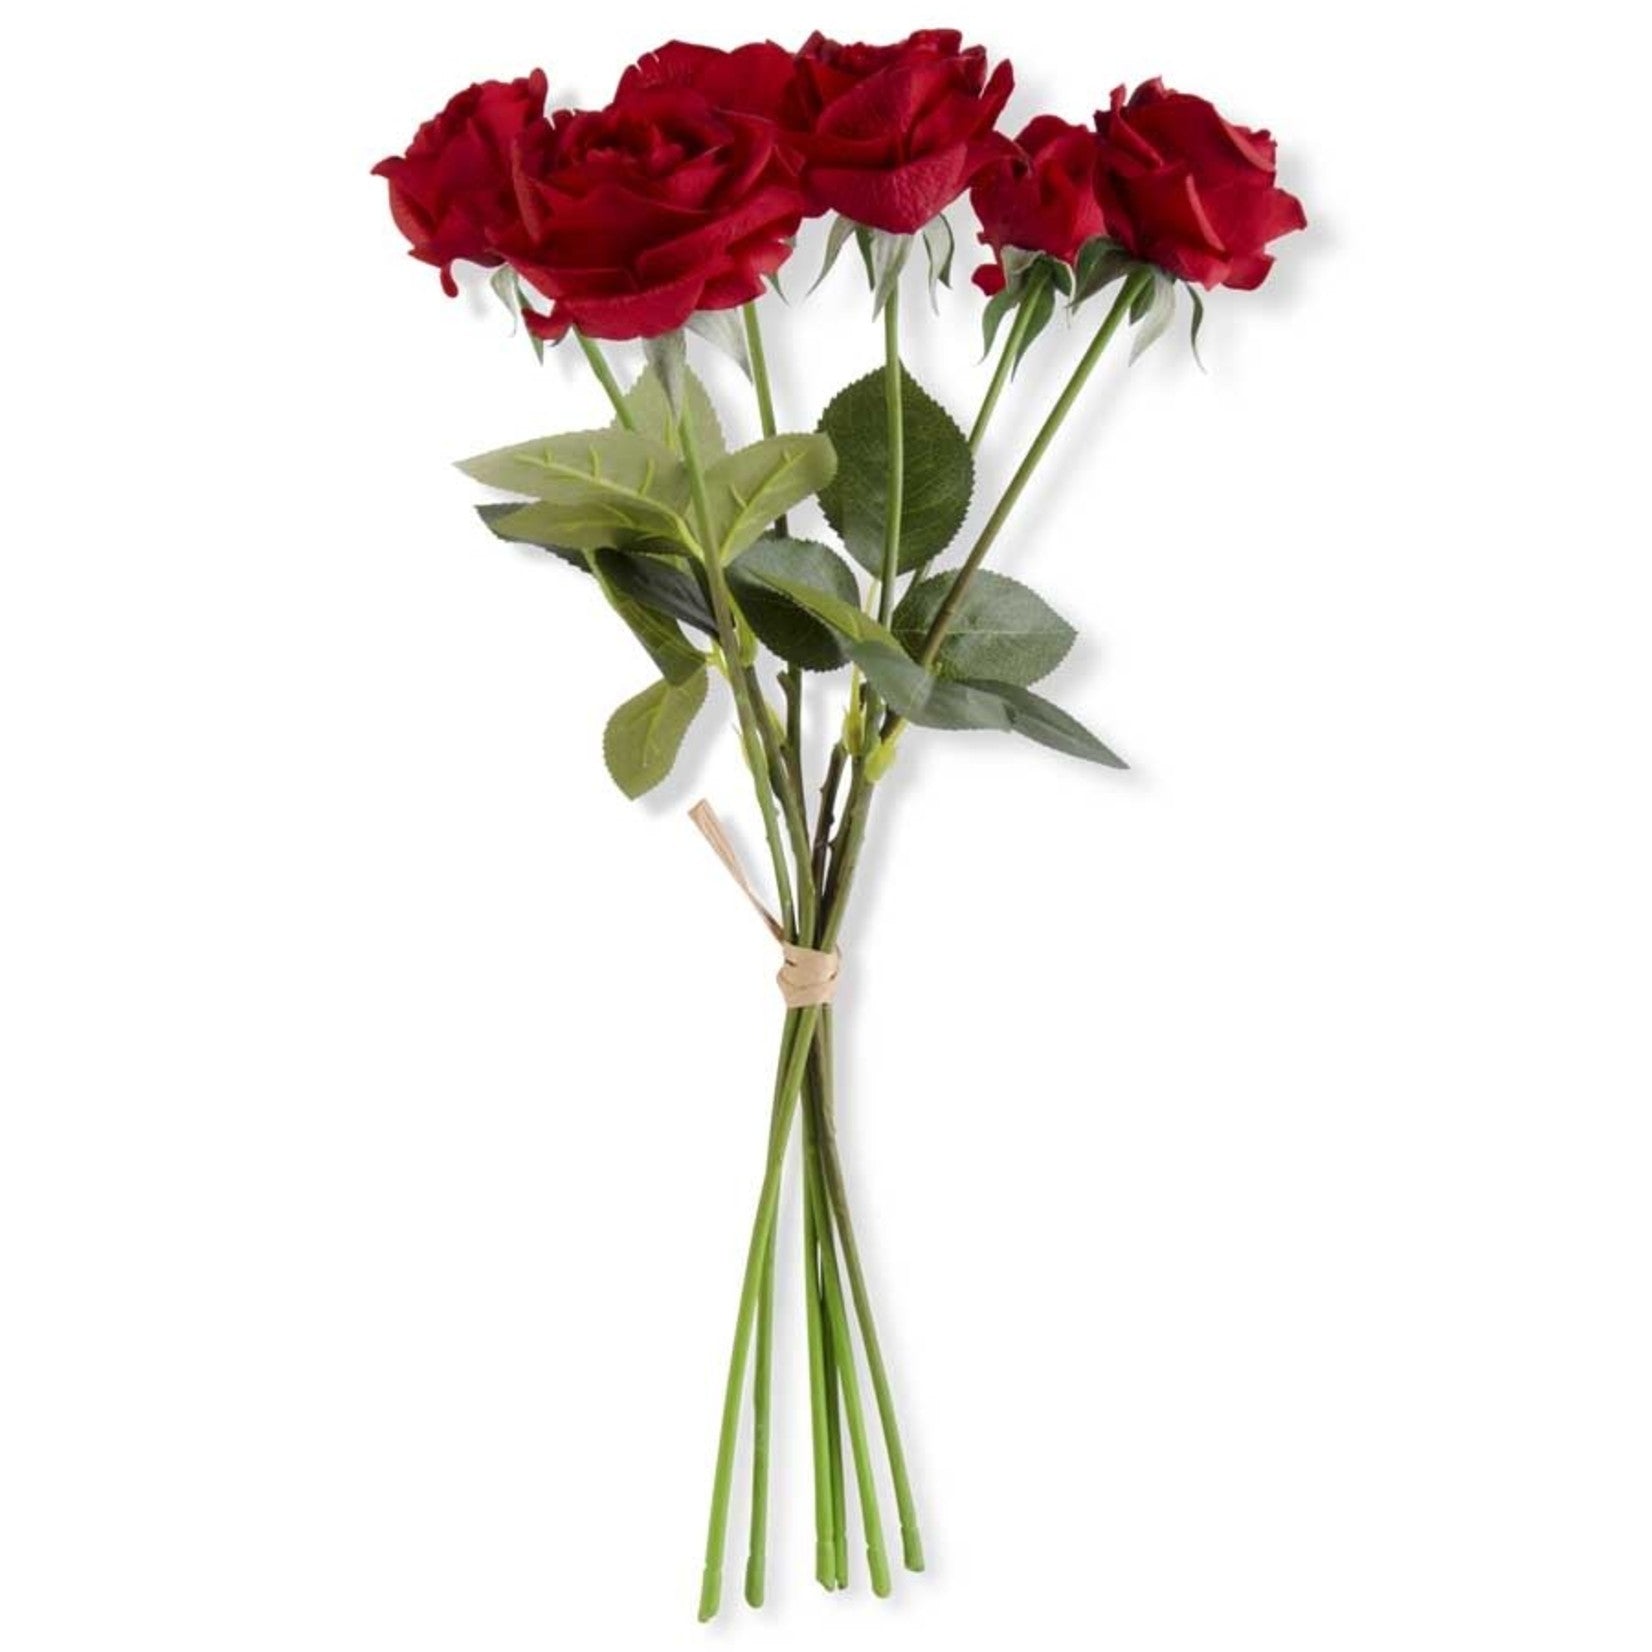 K&K Interiors 16390A-RD, 17 inch Red Real Touch Full Bloom Rose Stem w/Foliage Bundle (6 Stems)